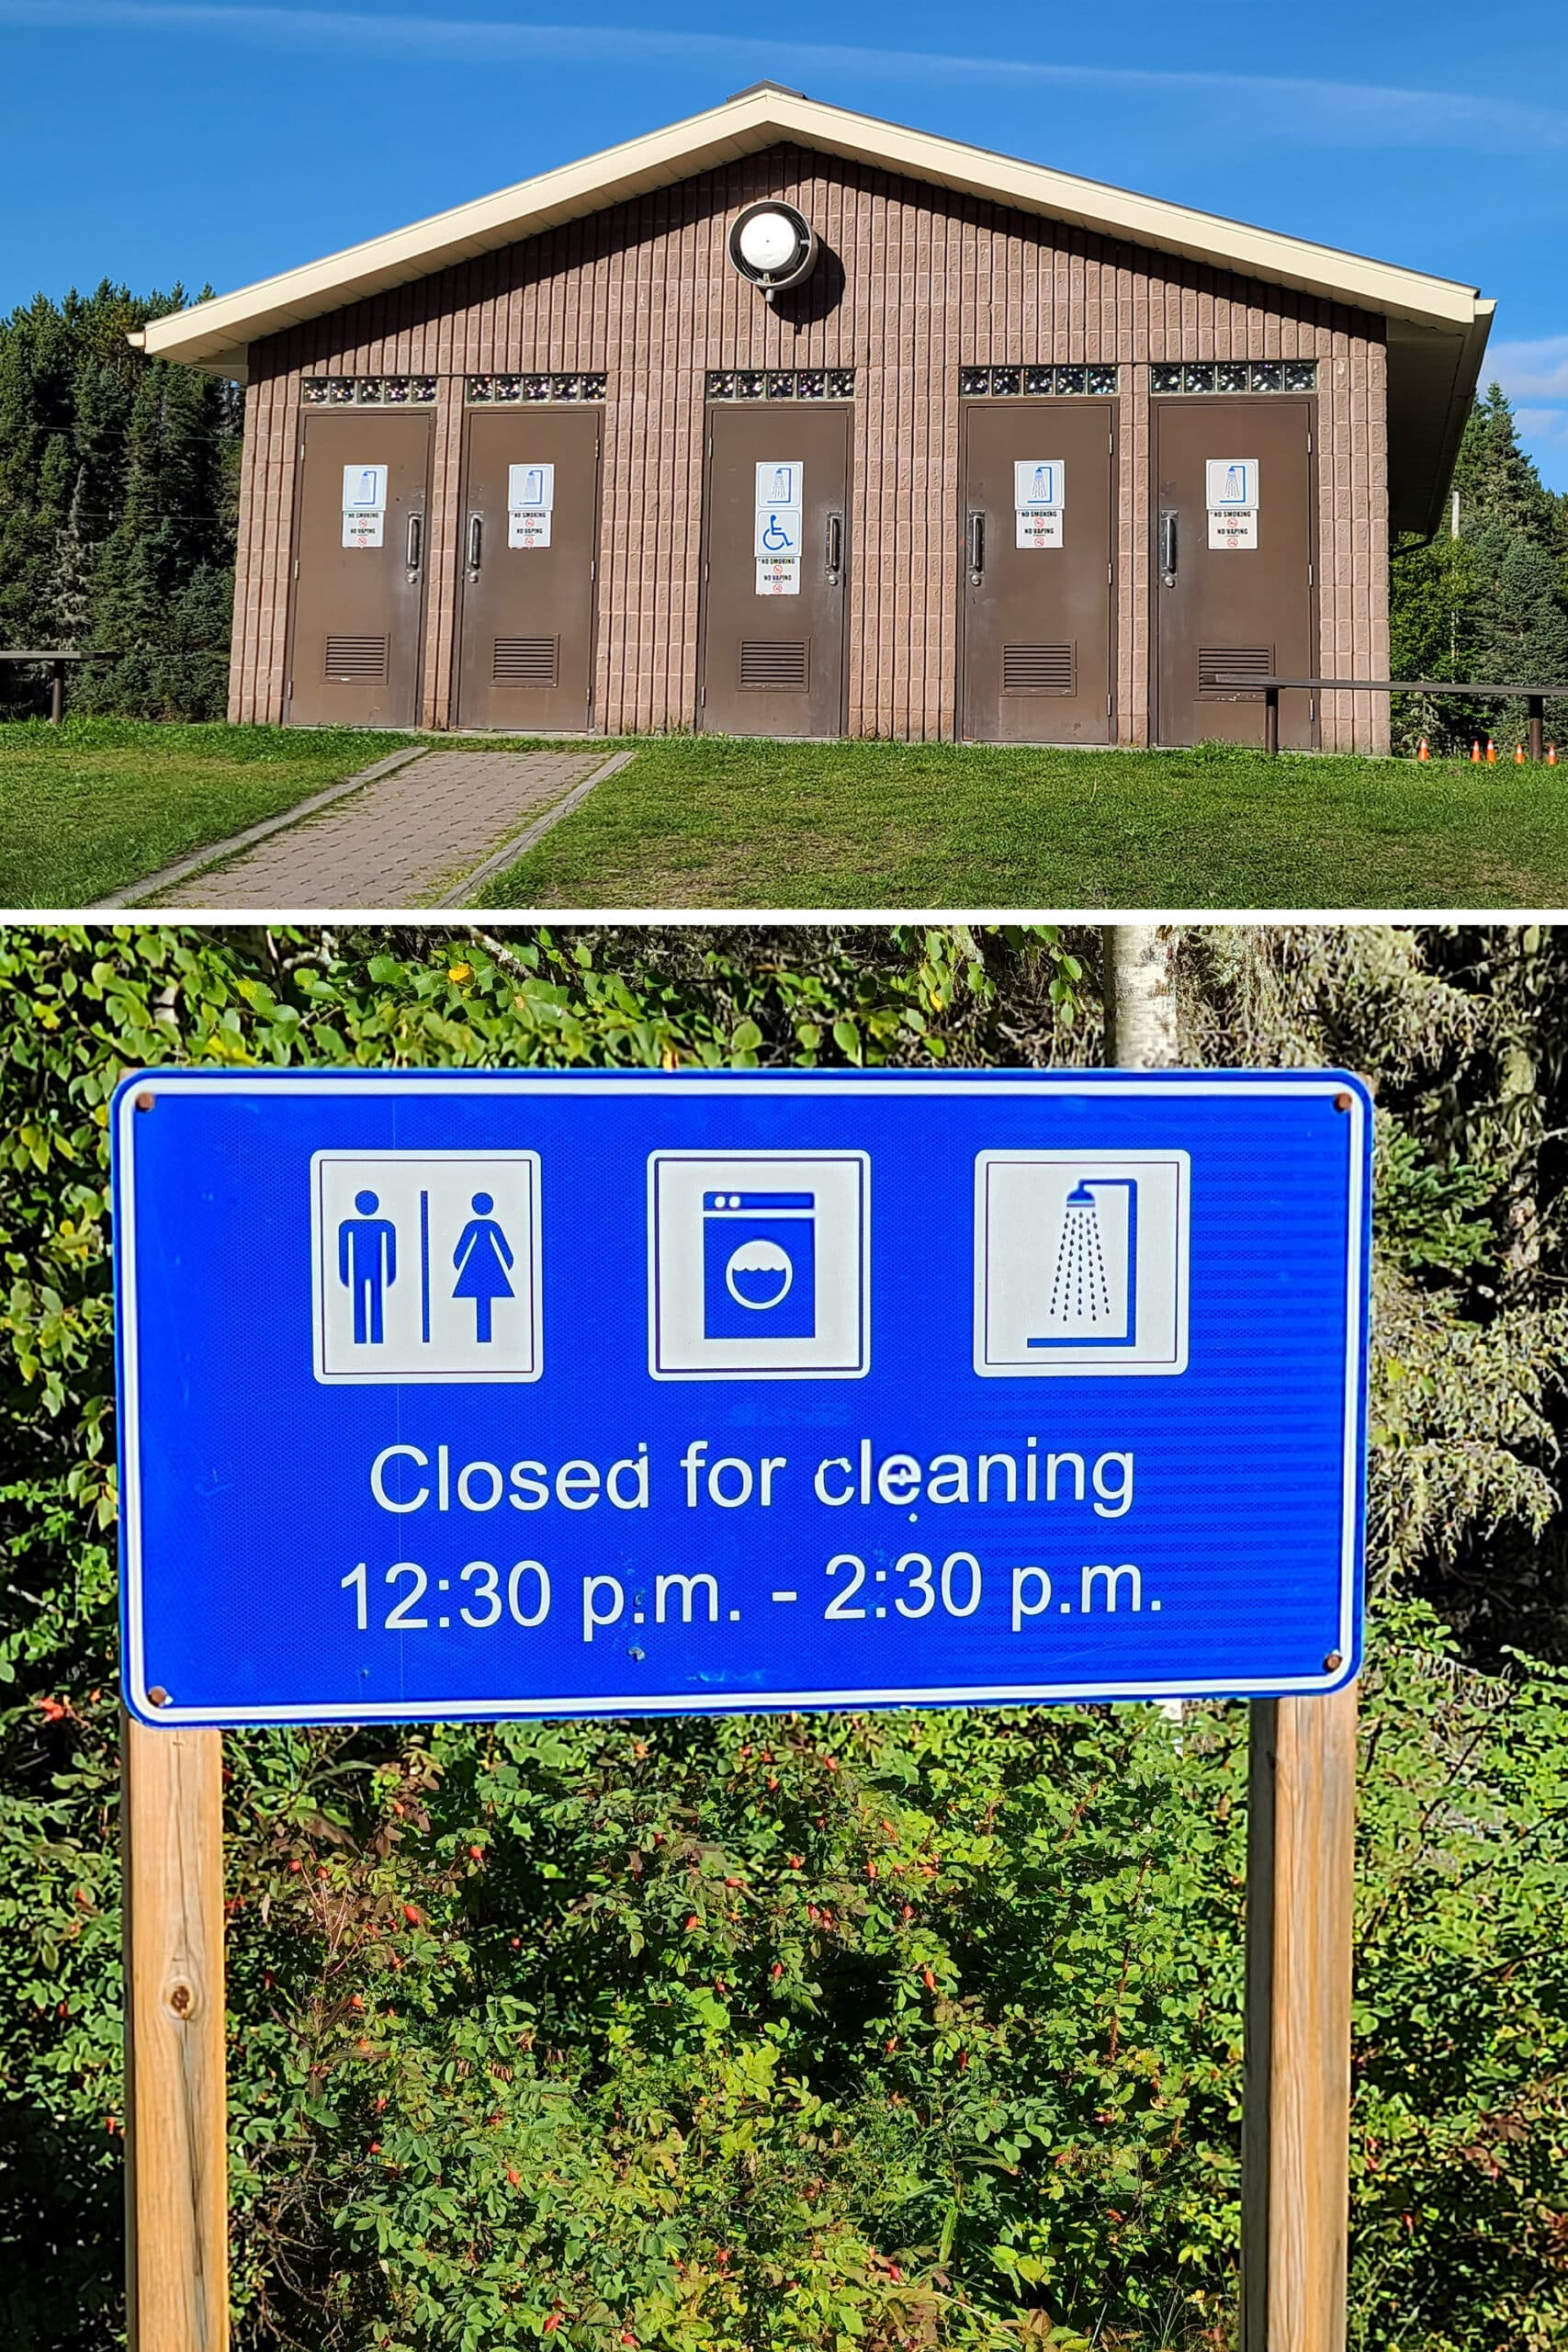 Neys provincial park's comfort station, with a sign about being closed for cleaning daily.